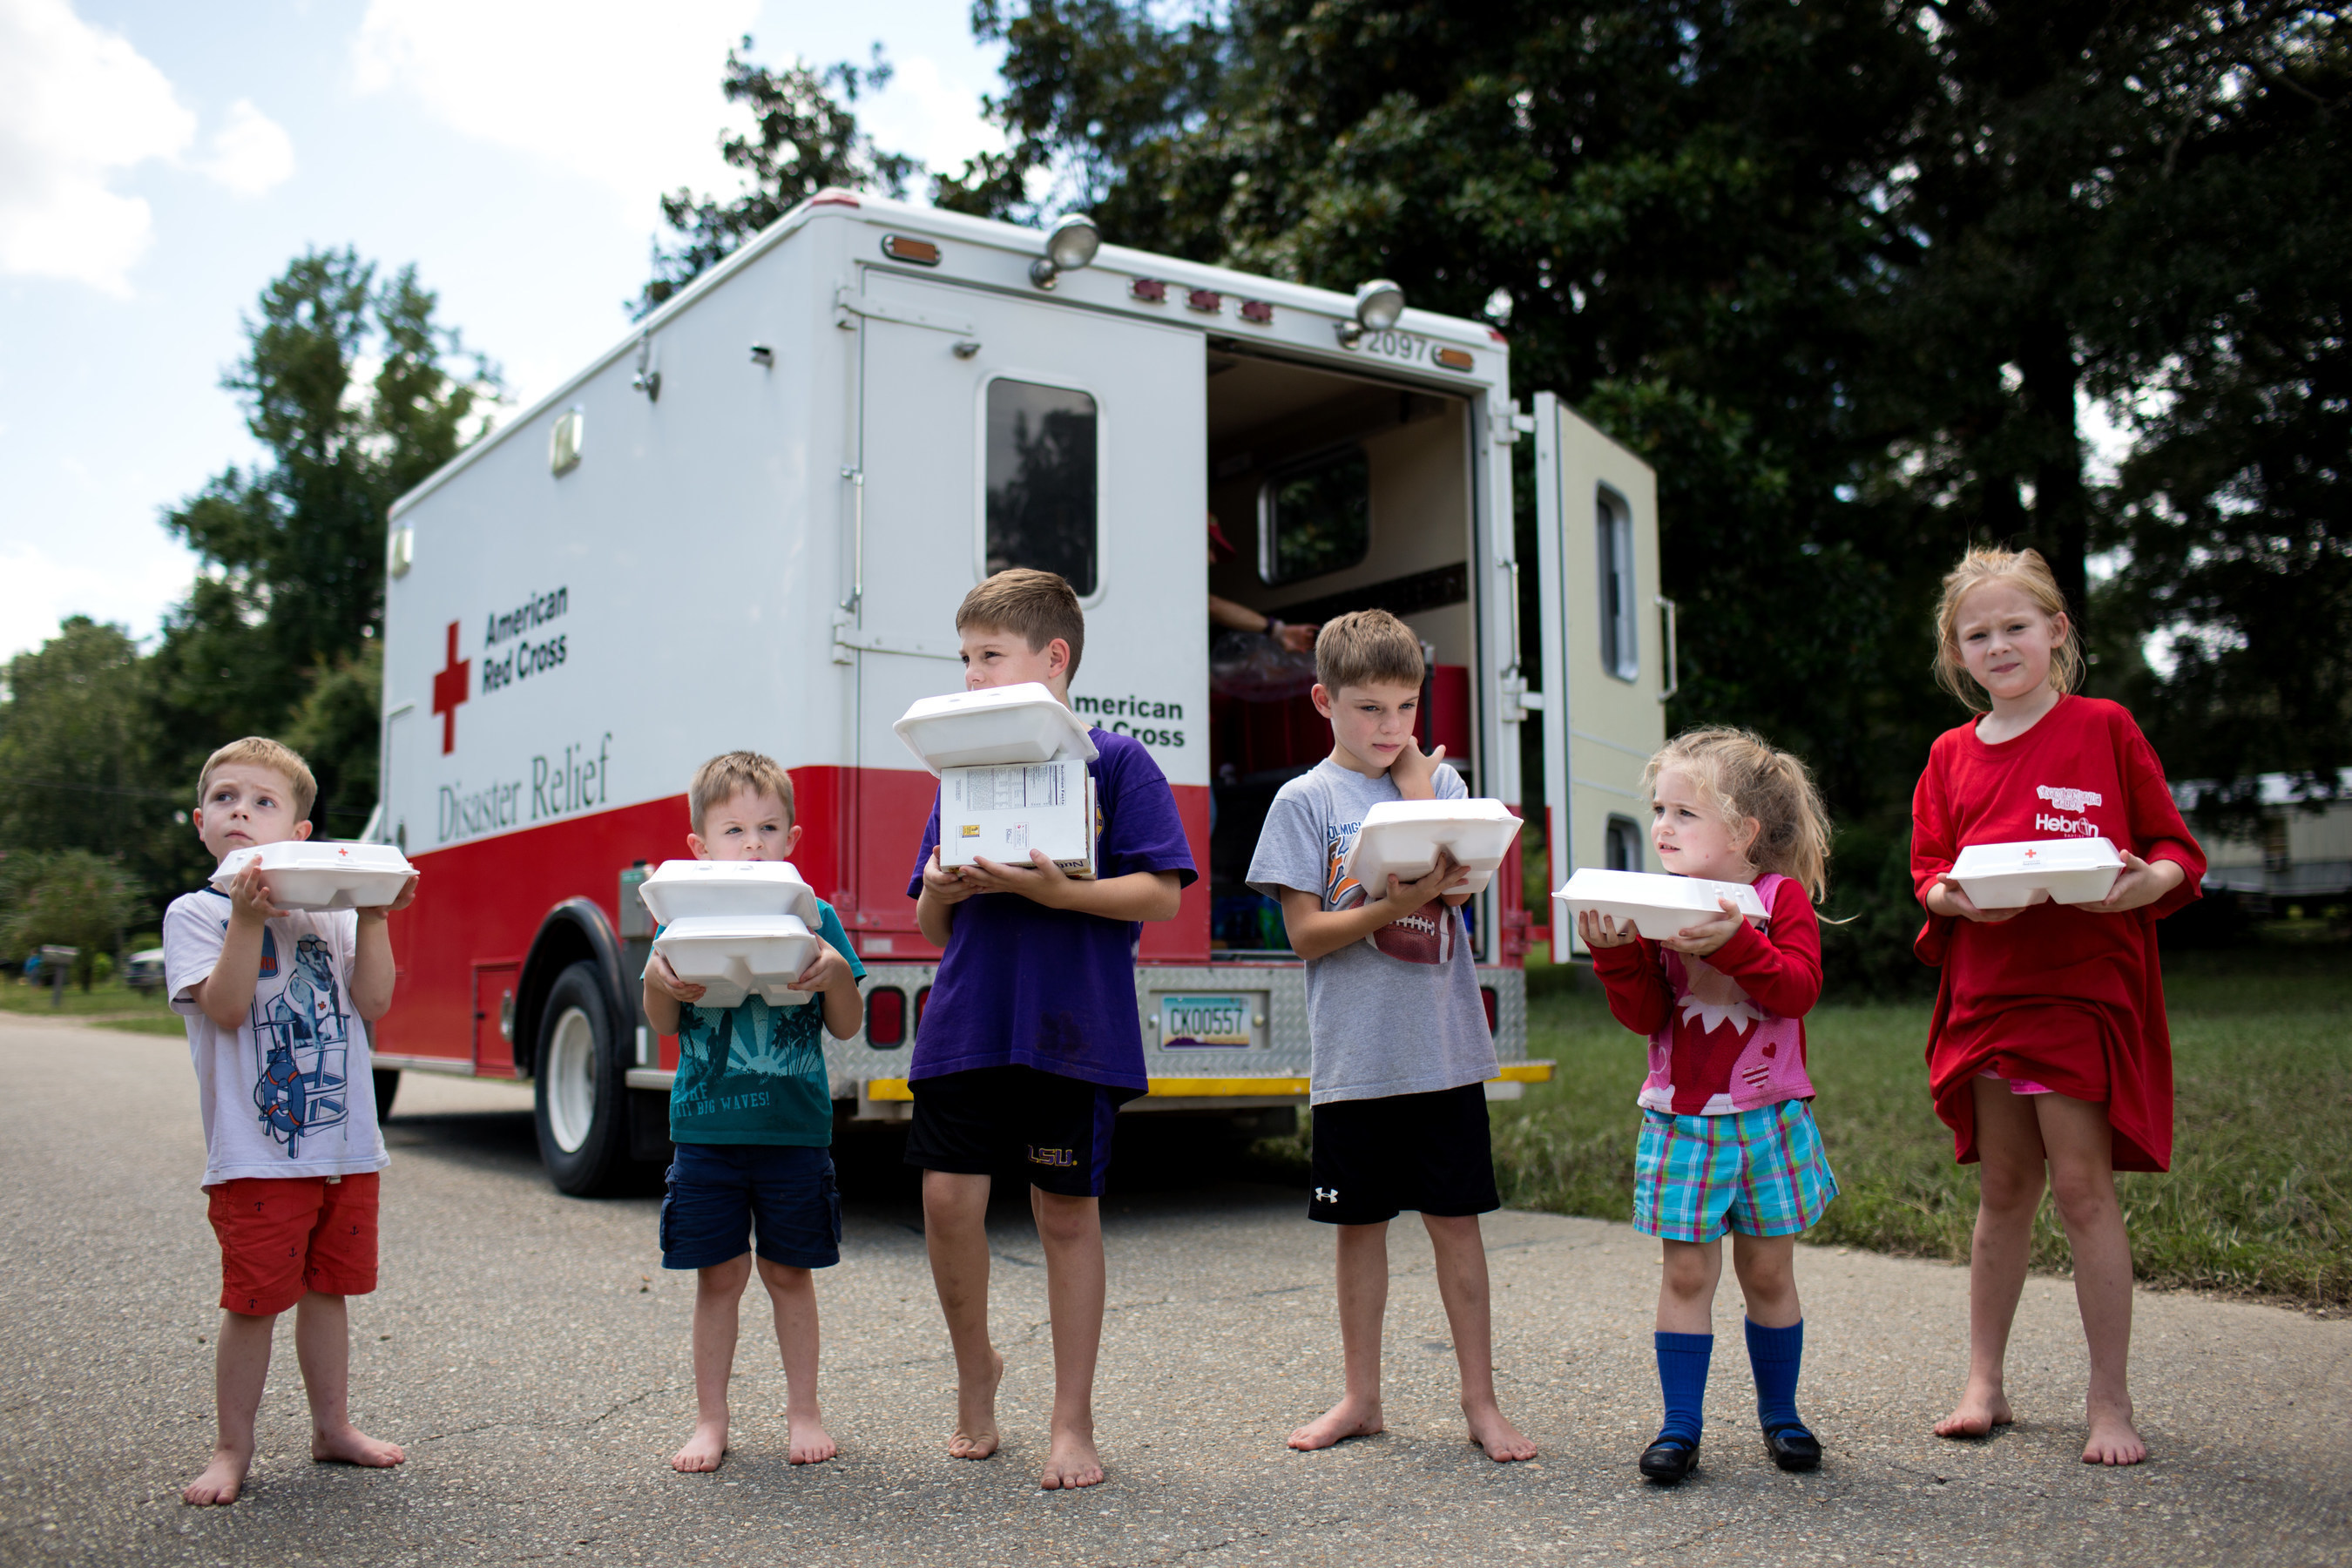 Children hold hot meals they received from the Red Cross in Denham Springs, a town hit hard by flooding across southern Louisiana. Red Cross photo by Marko Kokic